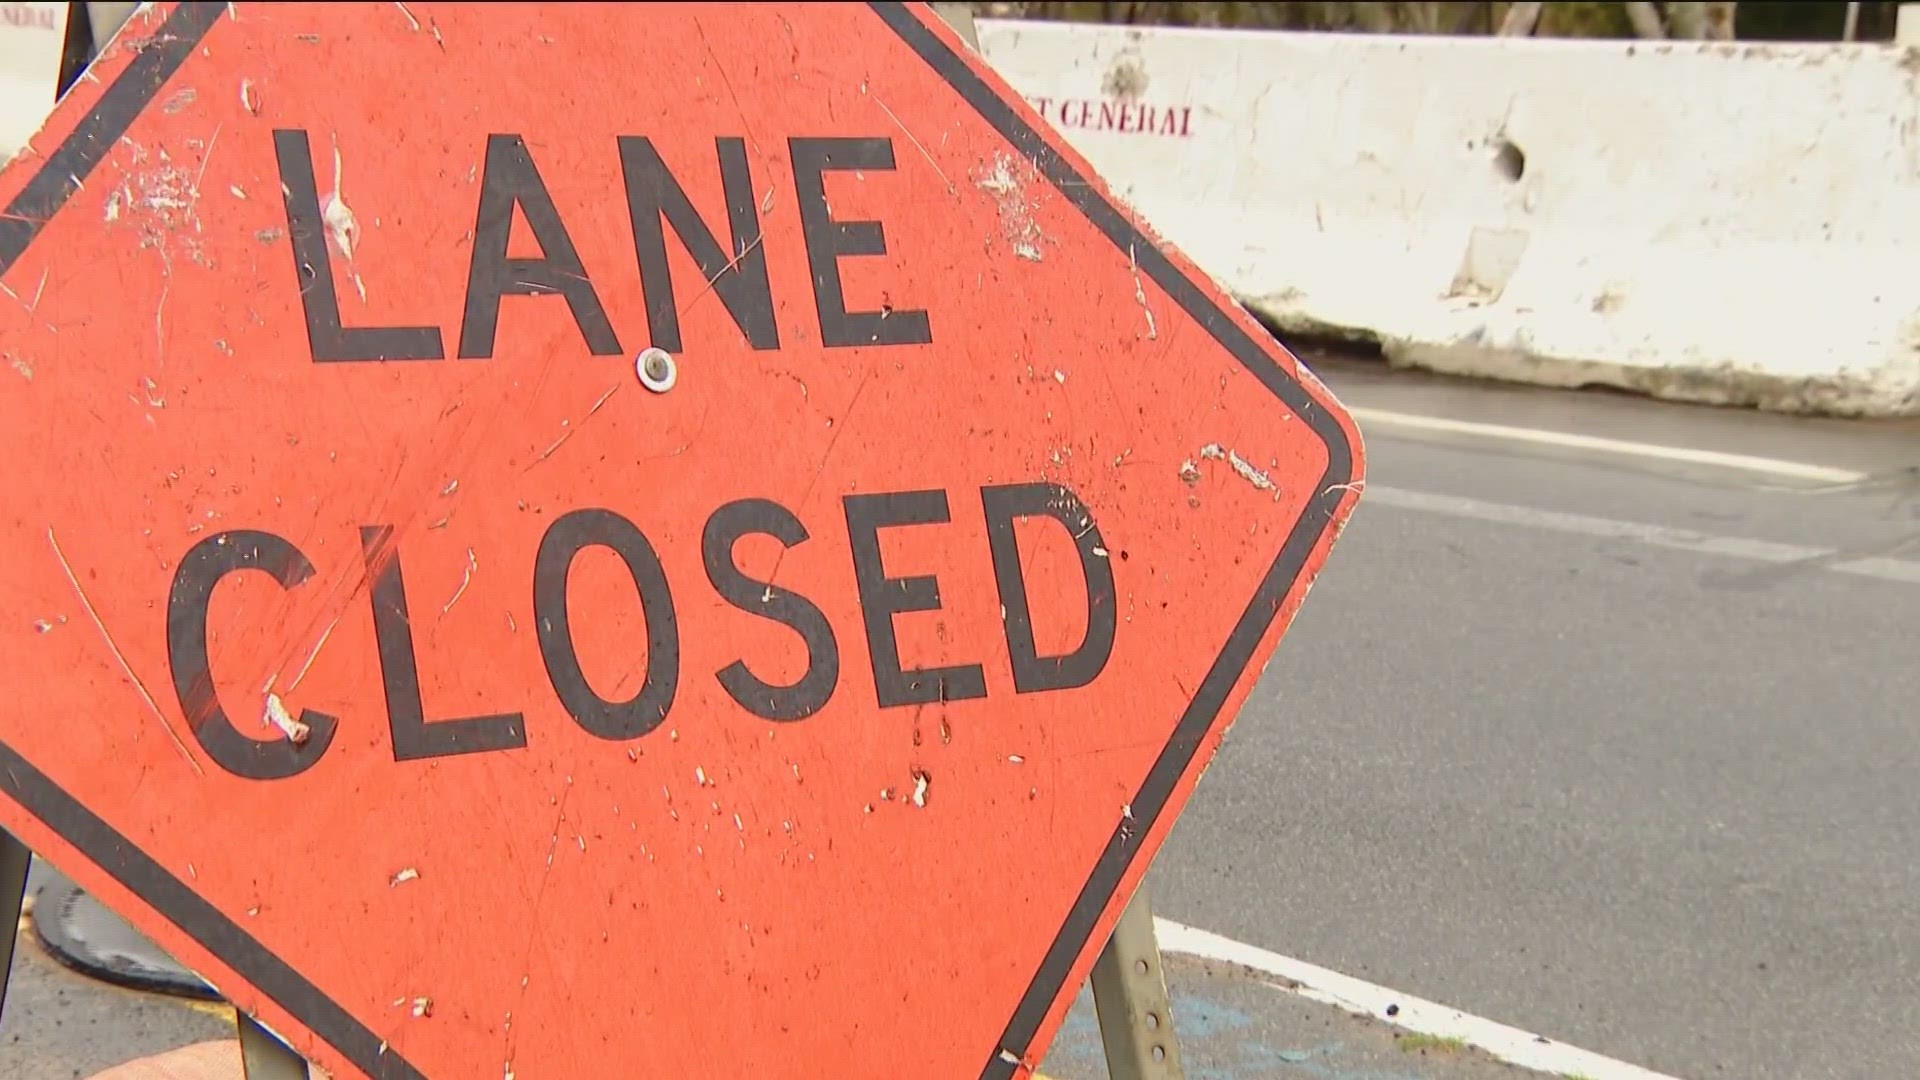 Construction and lane closure signs have been a source of frustration for commuters on Pershing Drive through Balboa Park for more than a year